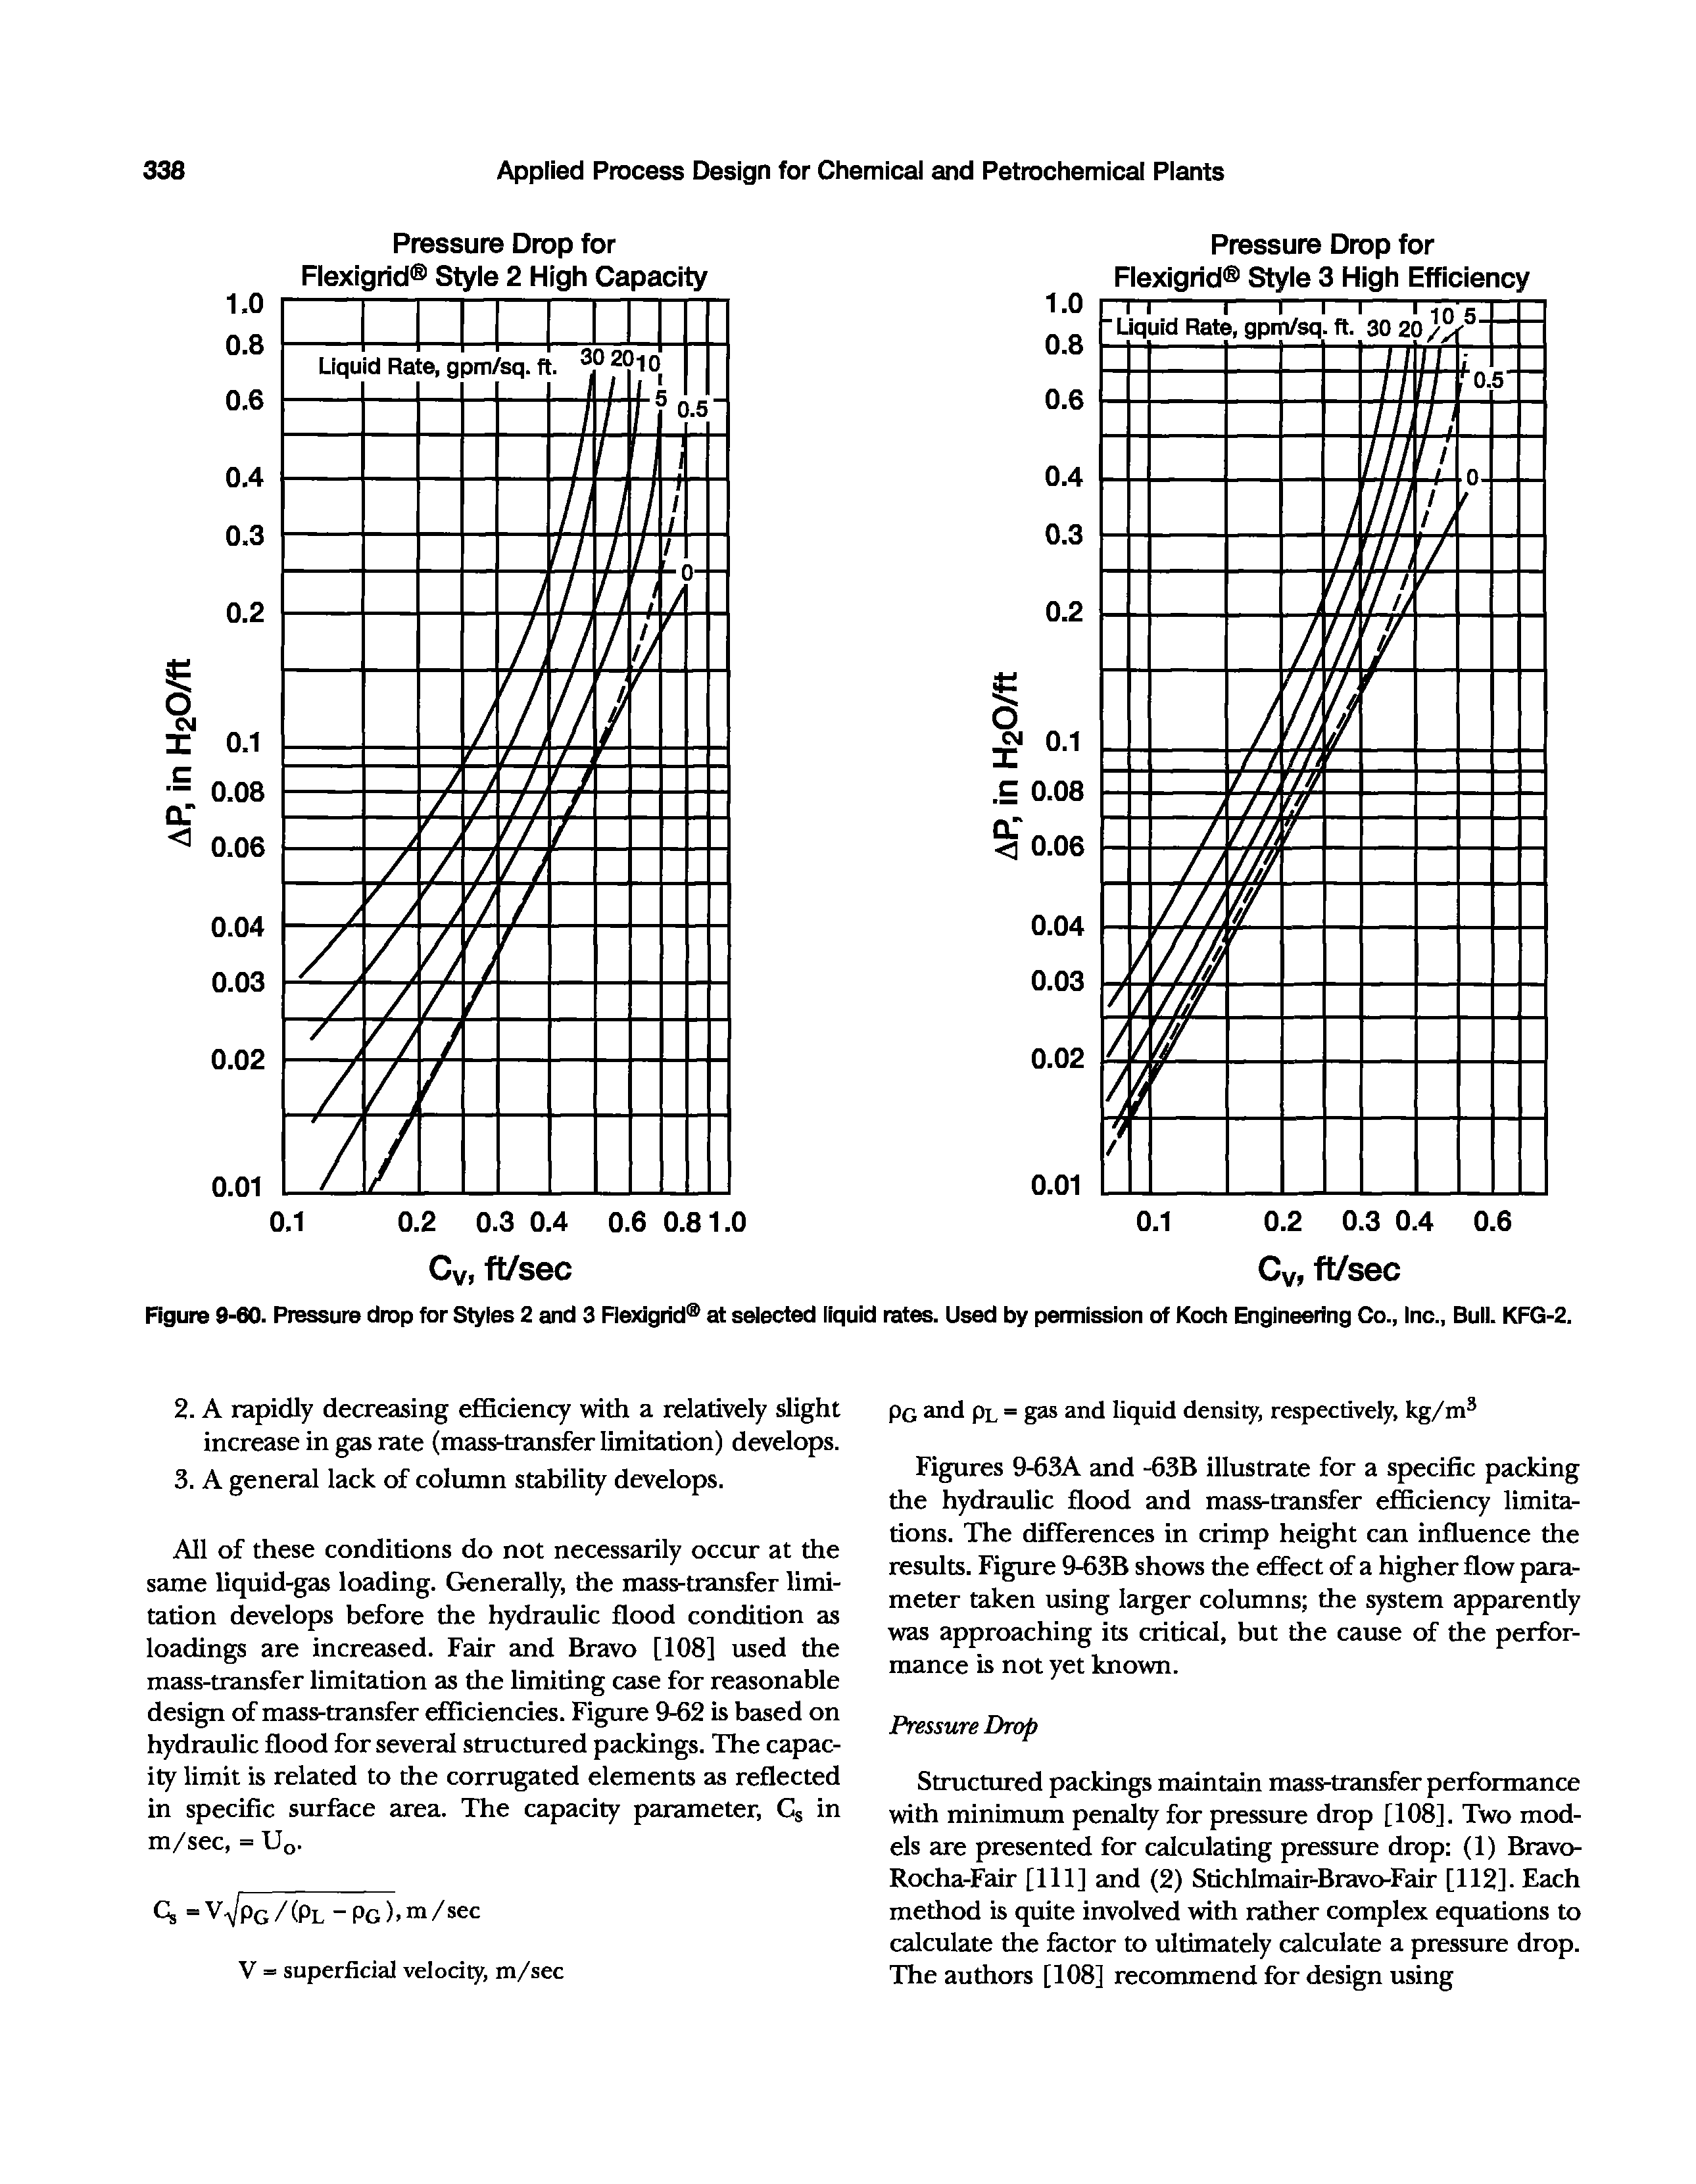 Figures 9-63A and -63B illustrate for a specific packing the hydraulic flood and mass-transfer efficiency limitations. The differences in crimp height can influence the results. Figure 9-63B shows the effect of a higher flow parameter taken using larger columns the system apparendy was approaching its critical, but the cause of the performance is not yet known.